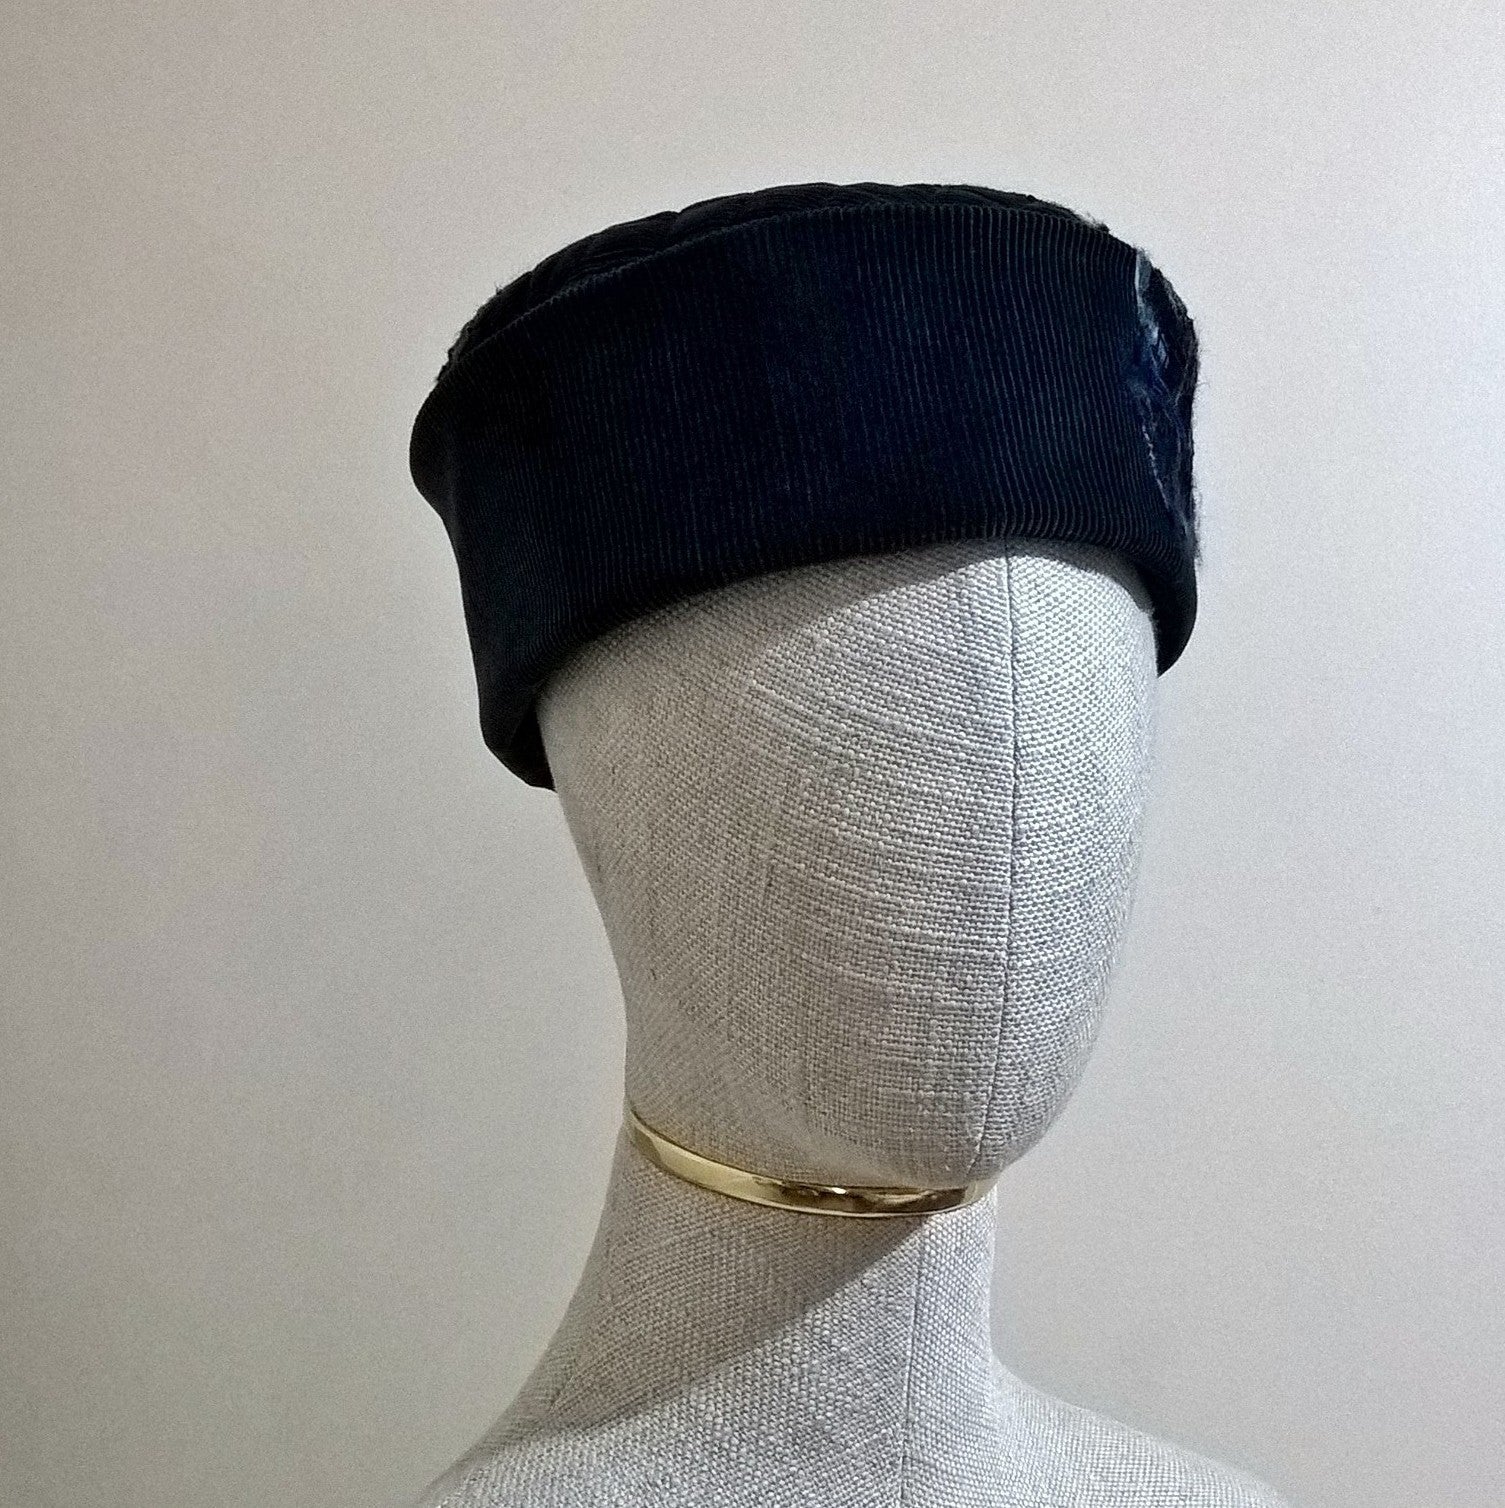 Smoking cap handmade in cyan blue corduroy and embellished with nuno felting and beading